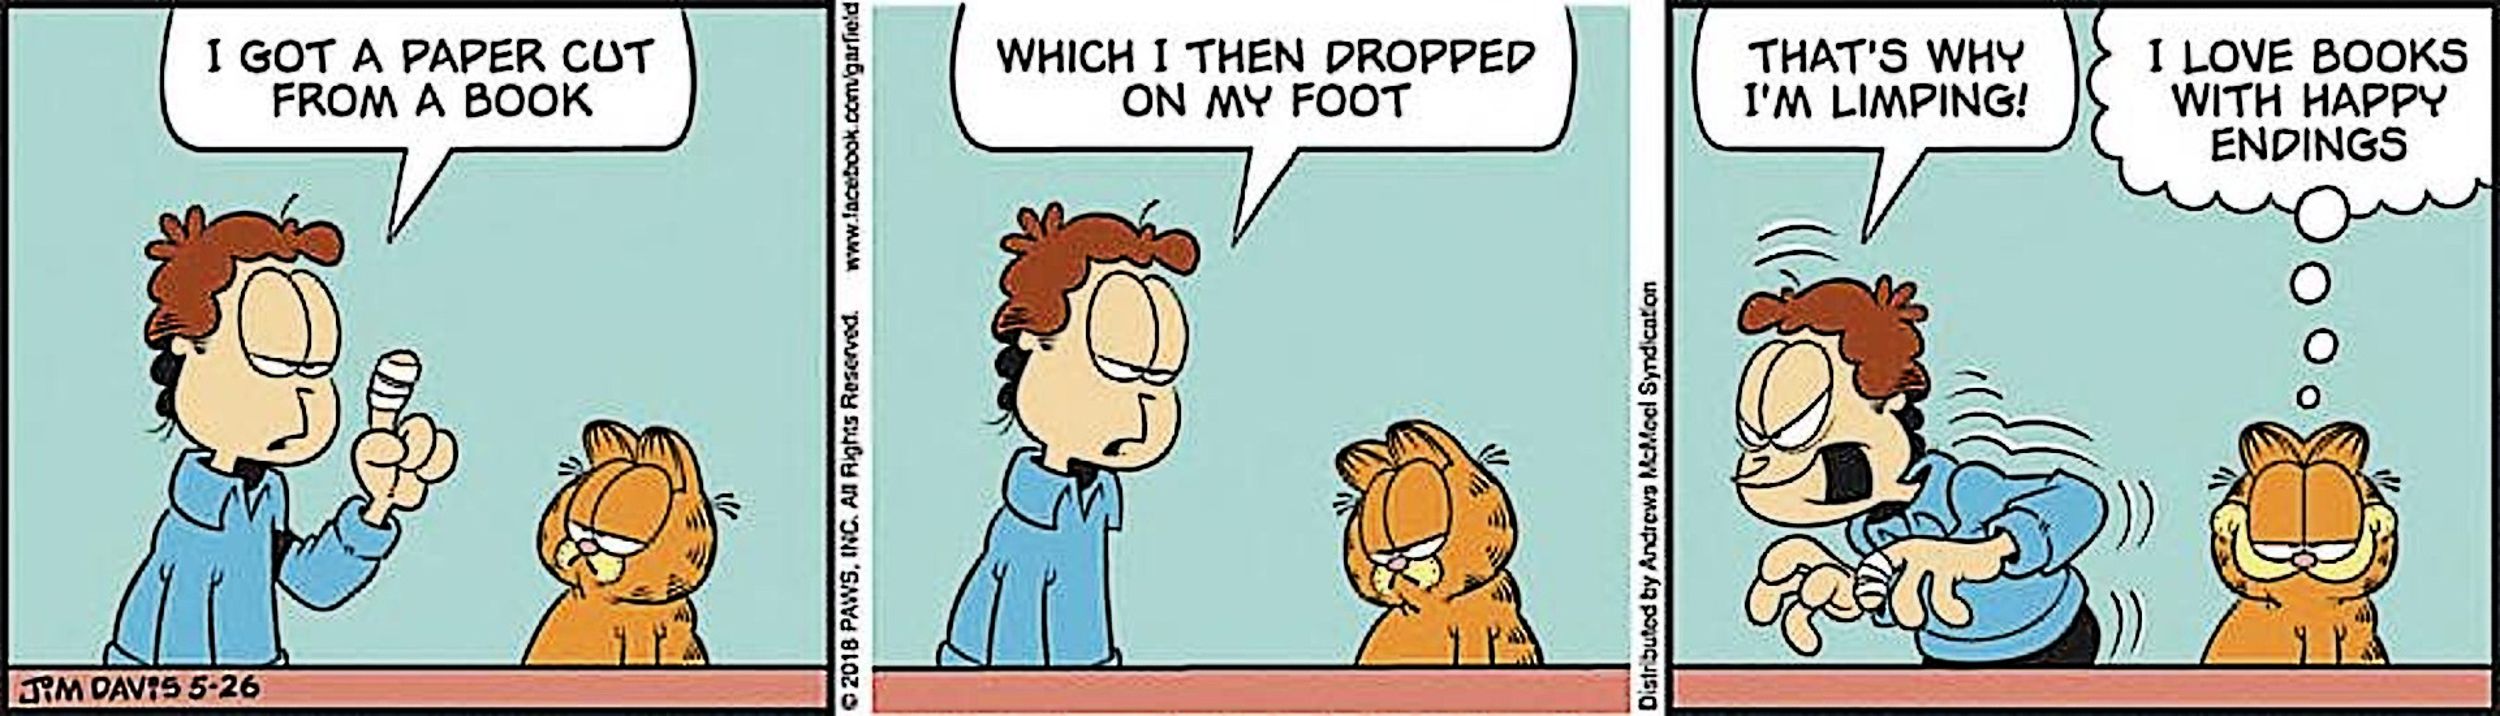 Garfield ,Jon Arbuckle got a paper cut and then dropped the book on his foot